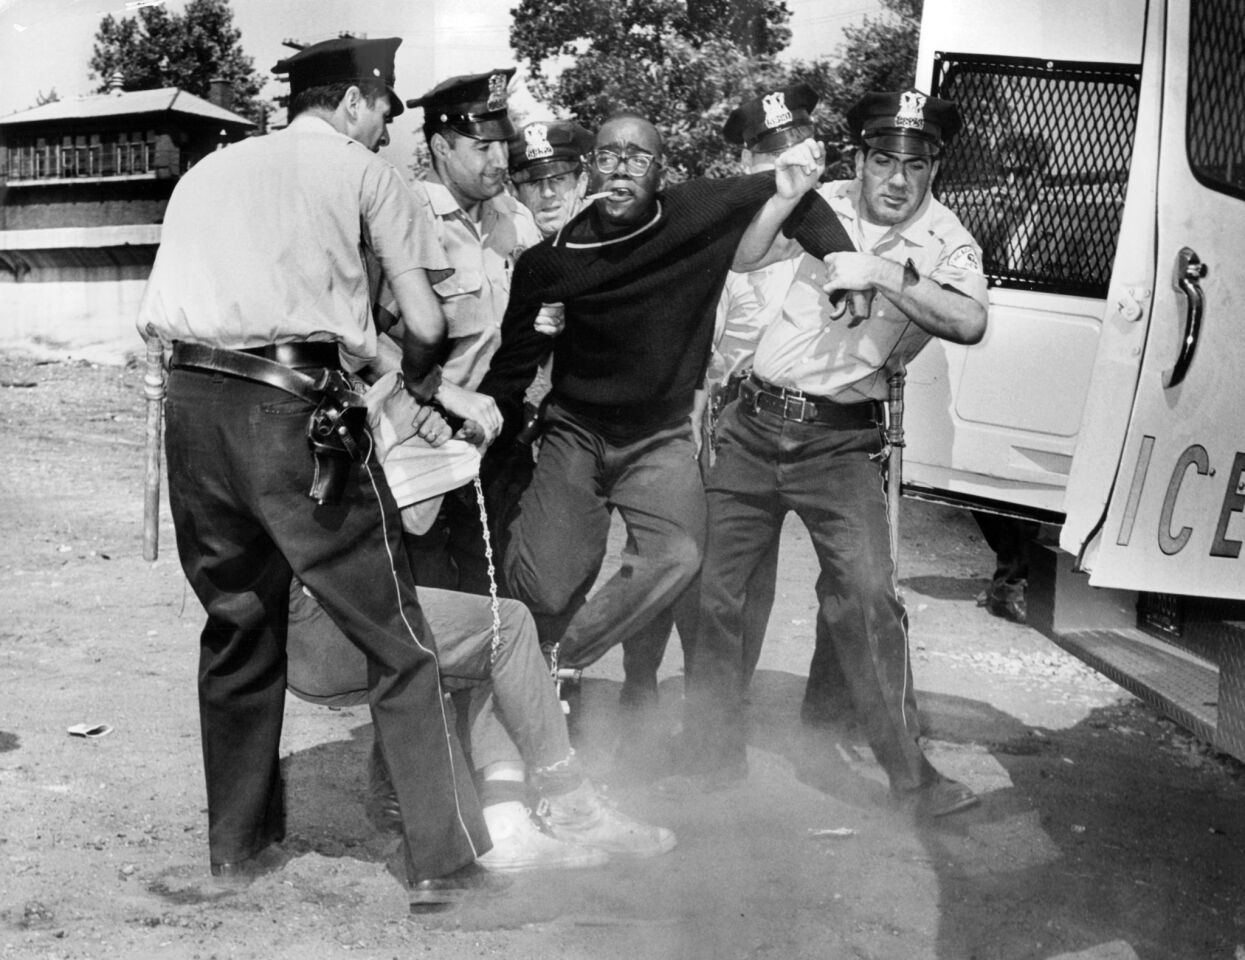 Demonstrators, chained together are carried to a patrol wagon by Chicago police officers on Aug. 13, 1963, at 73rd Street and Lowe Avenue in the Englewood neighborhood. The group was protesting school segregation.